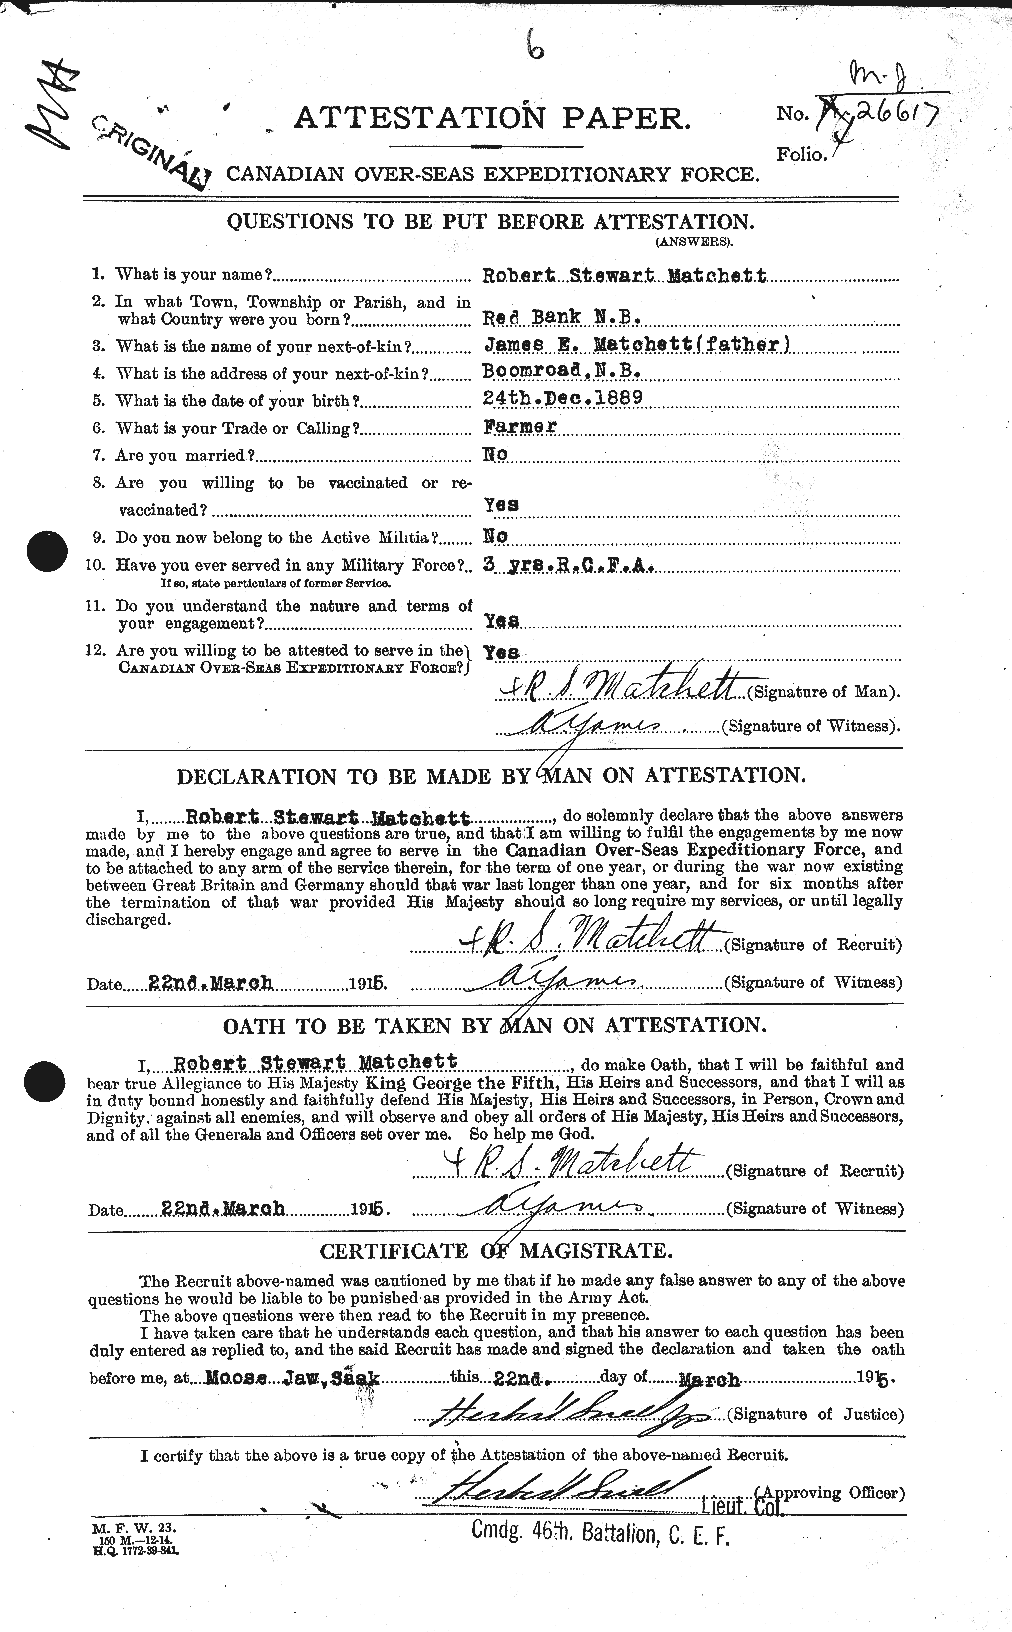 Personnel Records of the First World War - CEF 488589a